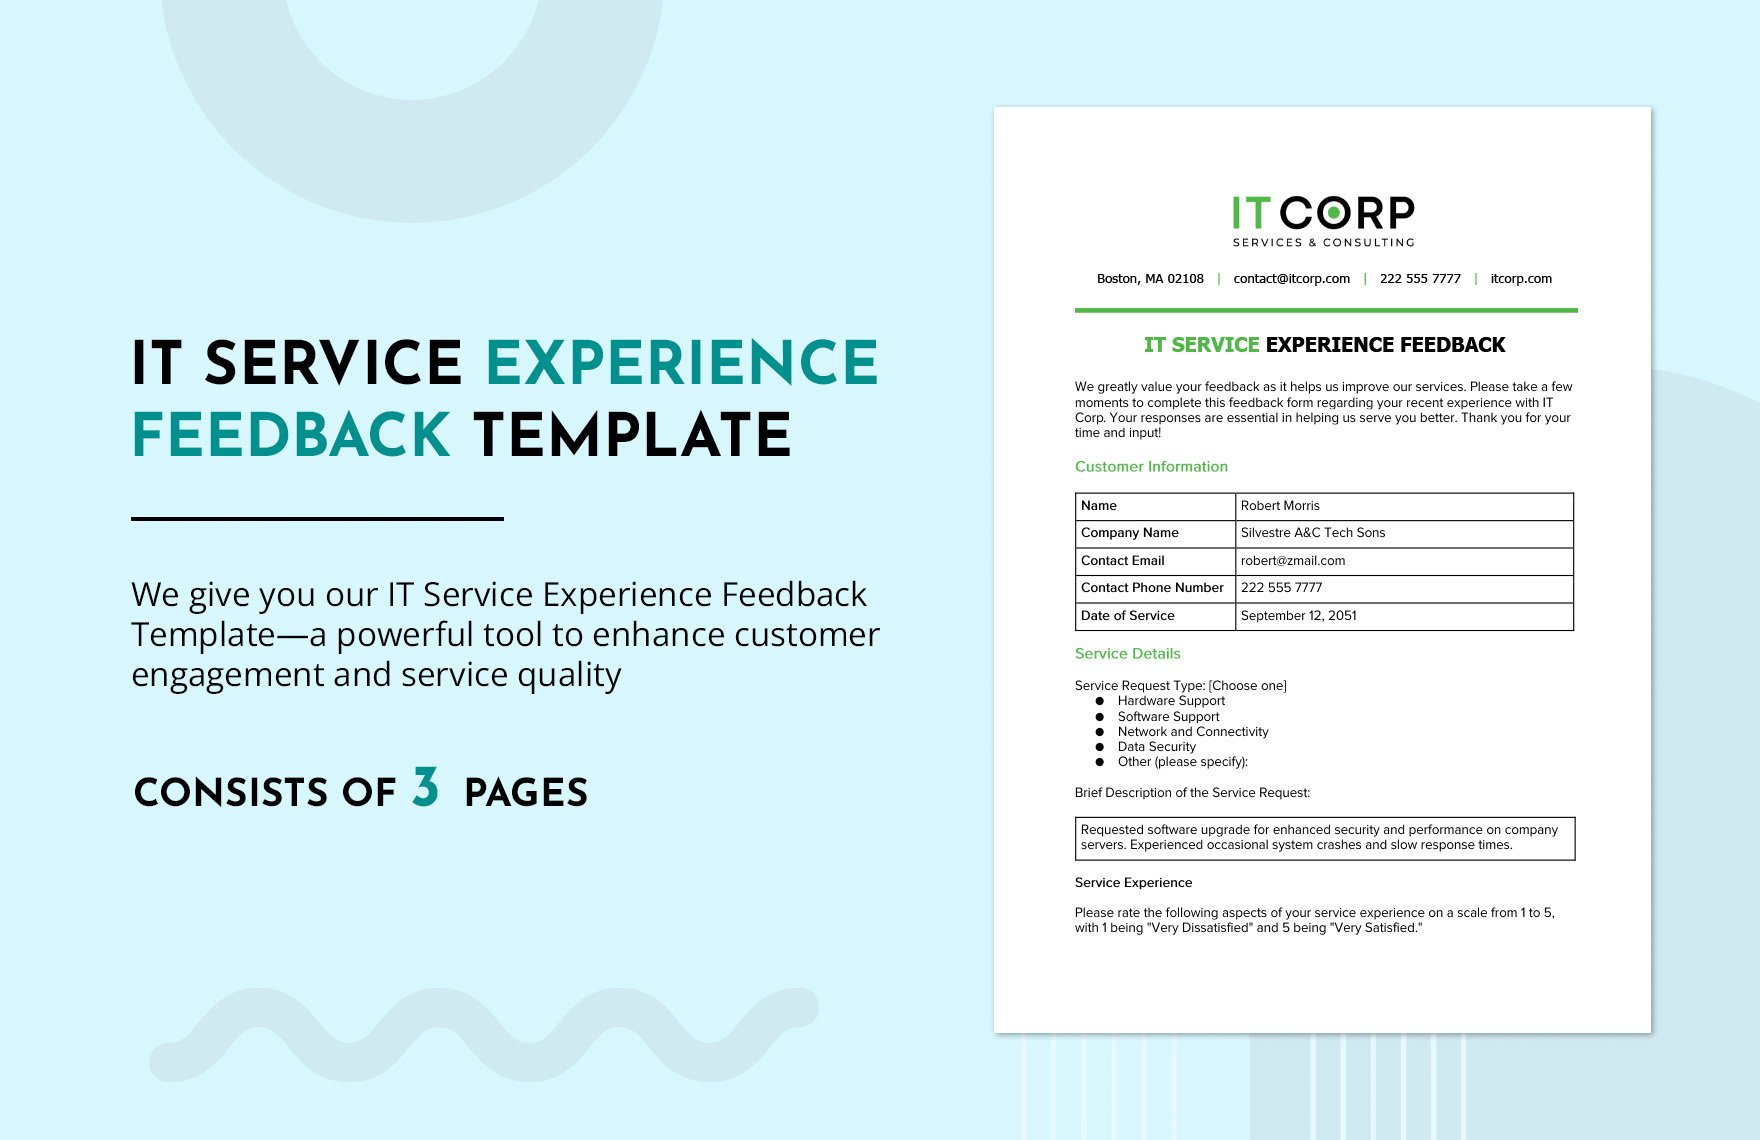 IT Service Experience Feedback Template